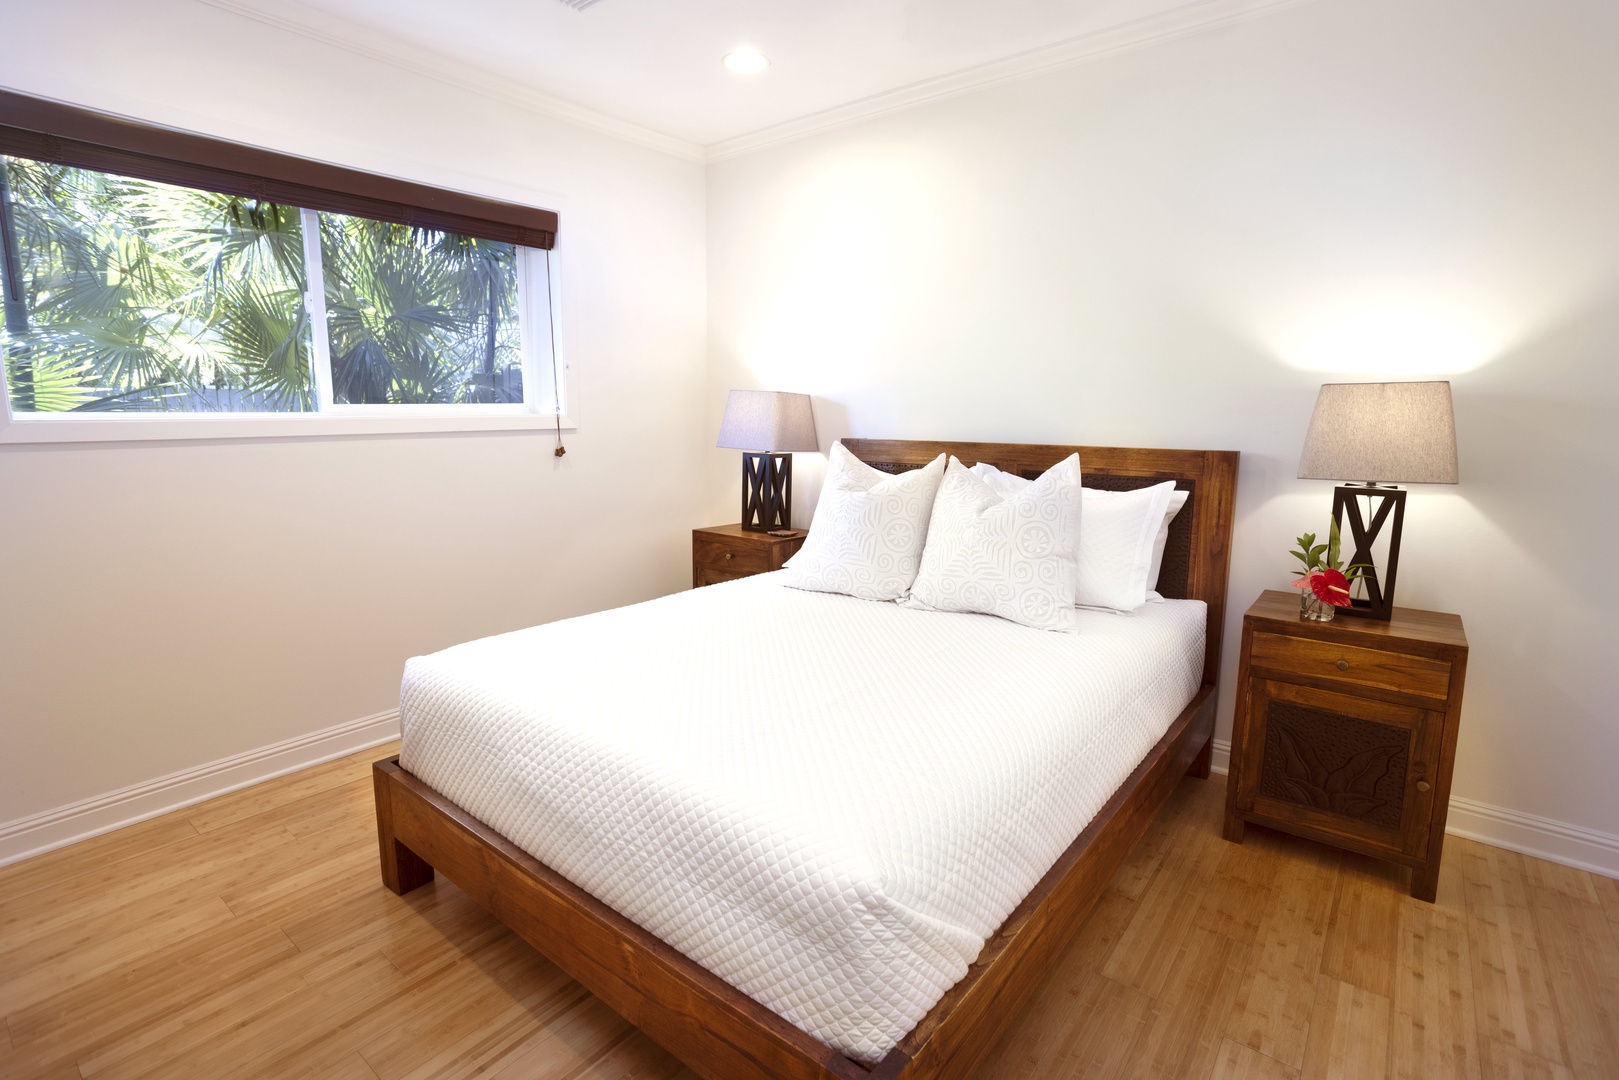 Kailua Vacation Rentals, Mokulua Seaside - Bright and airy guest suite with a queen bed for a restful night